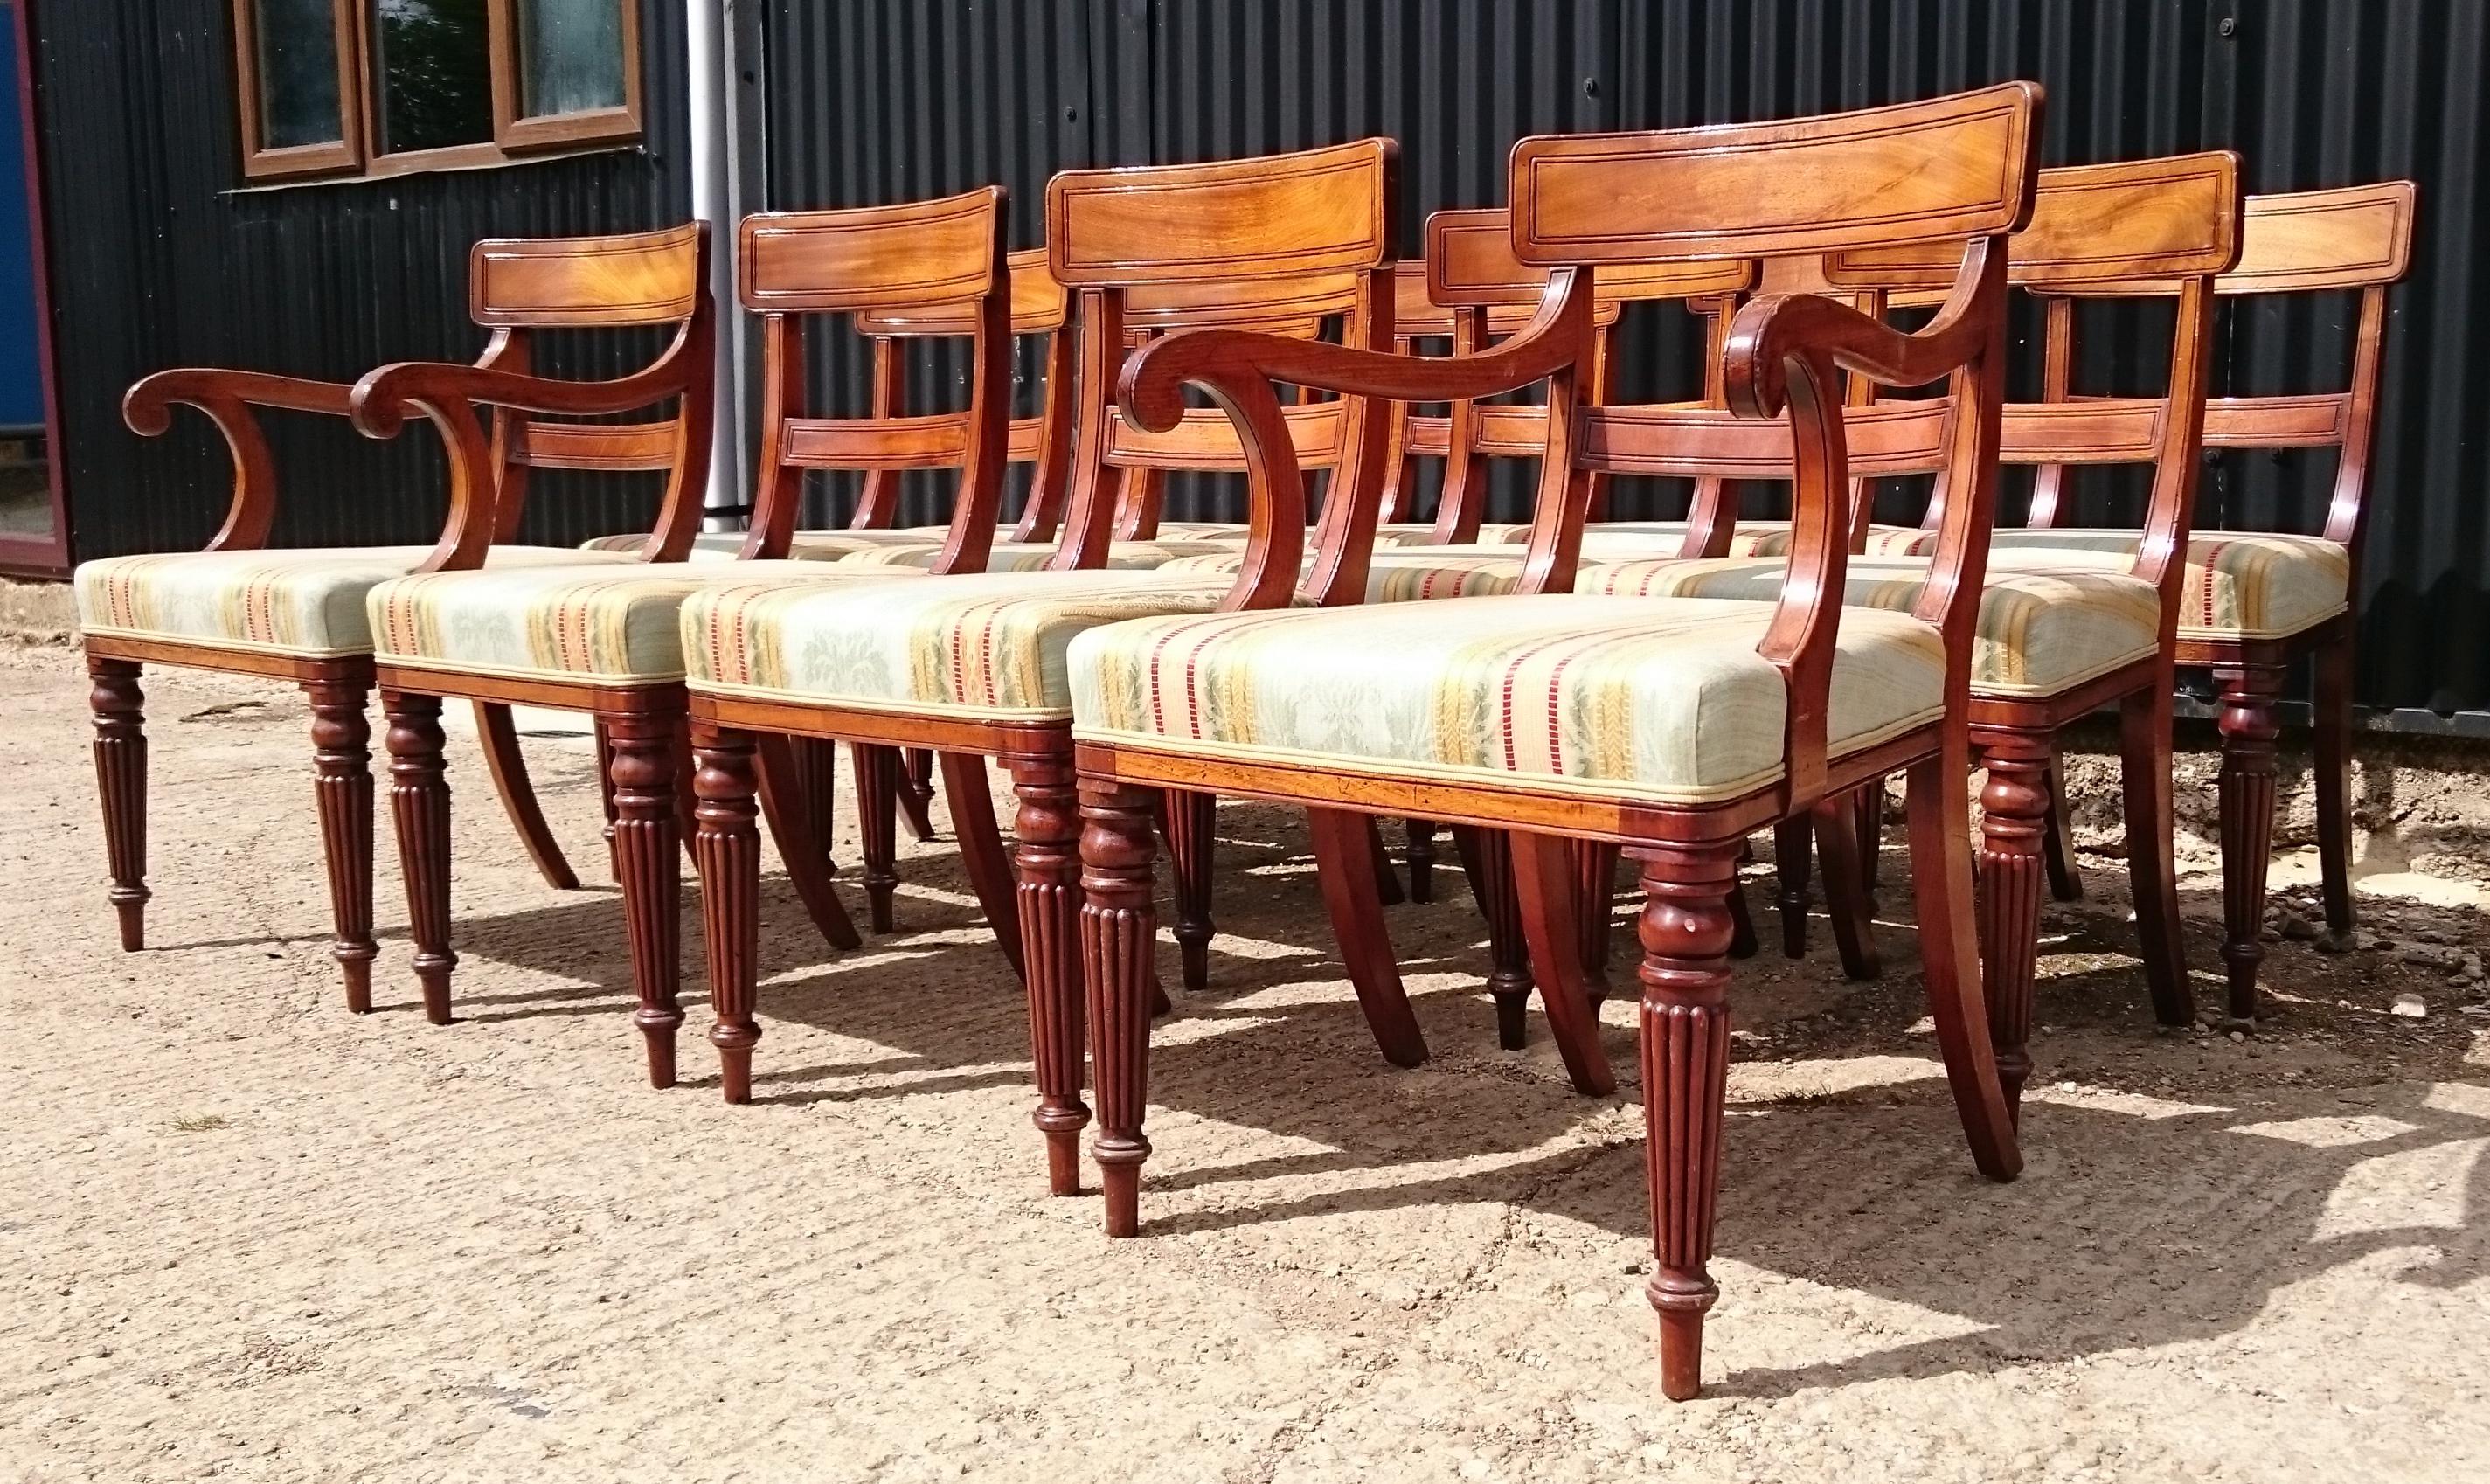 Set of Twelve Early 19th Century Regency Mahogany Antique Dining Chairs 2